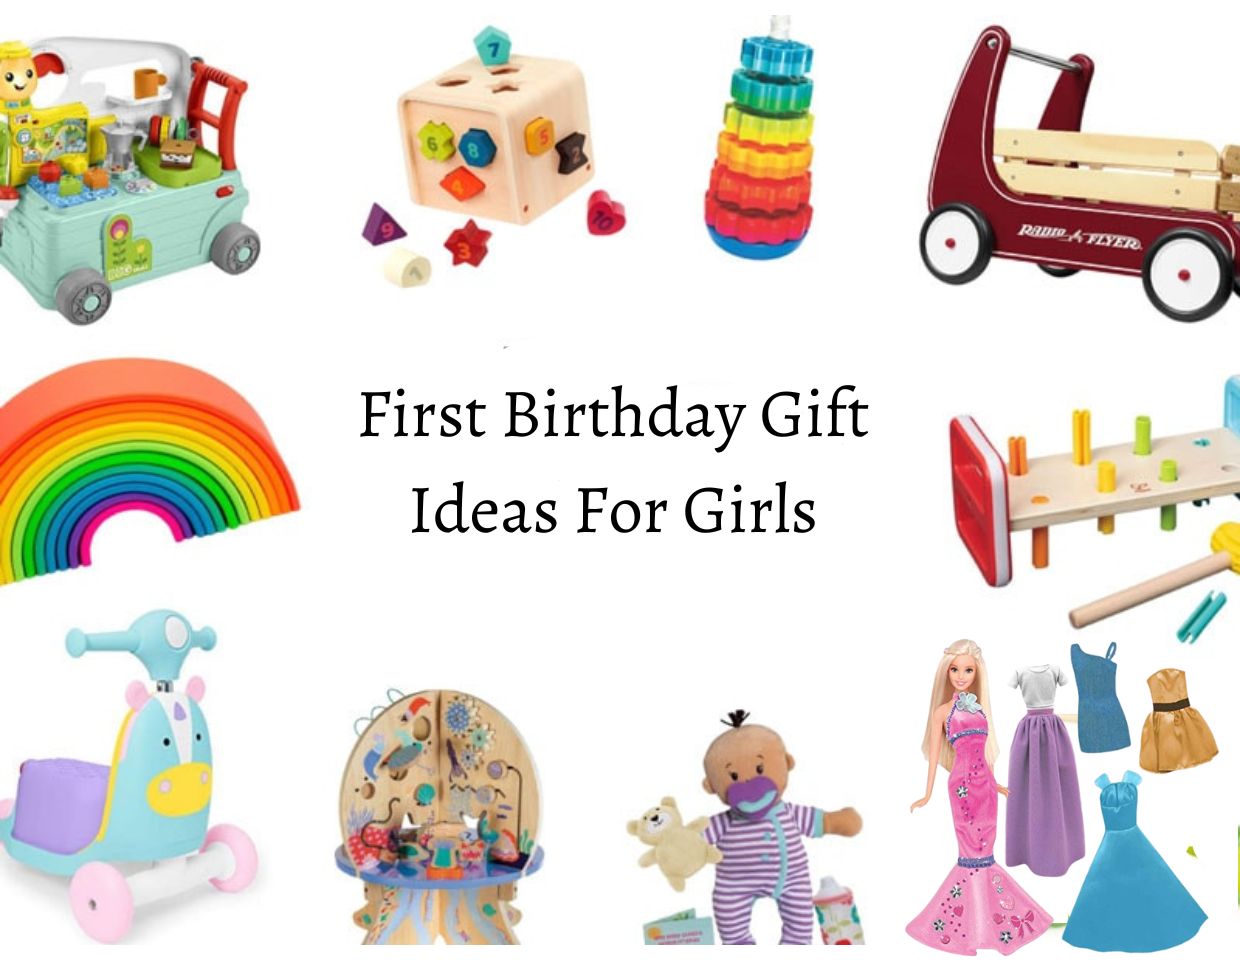 First Birthday Gift Ideas For Girls